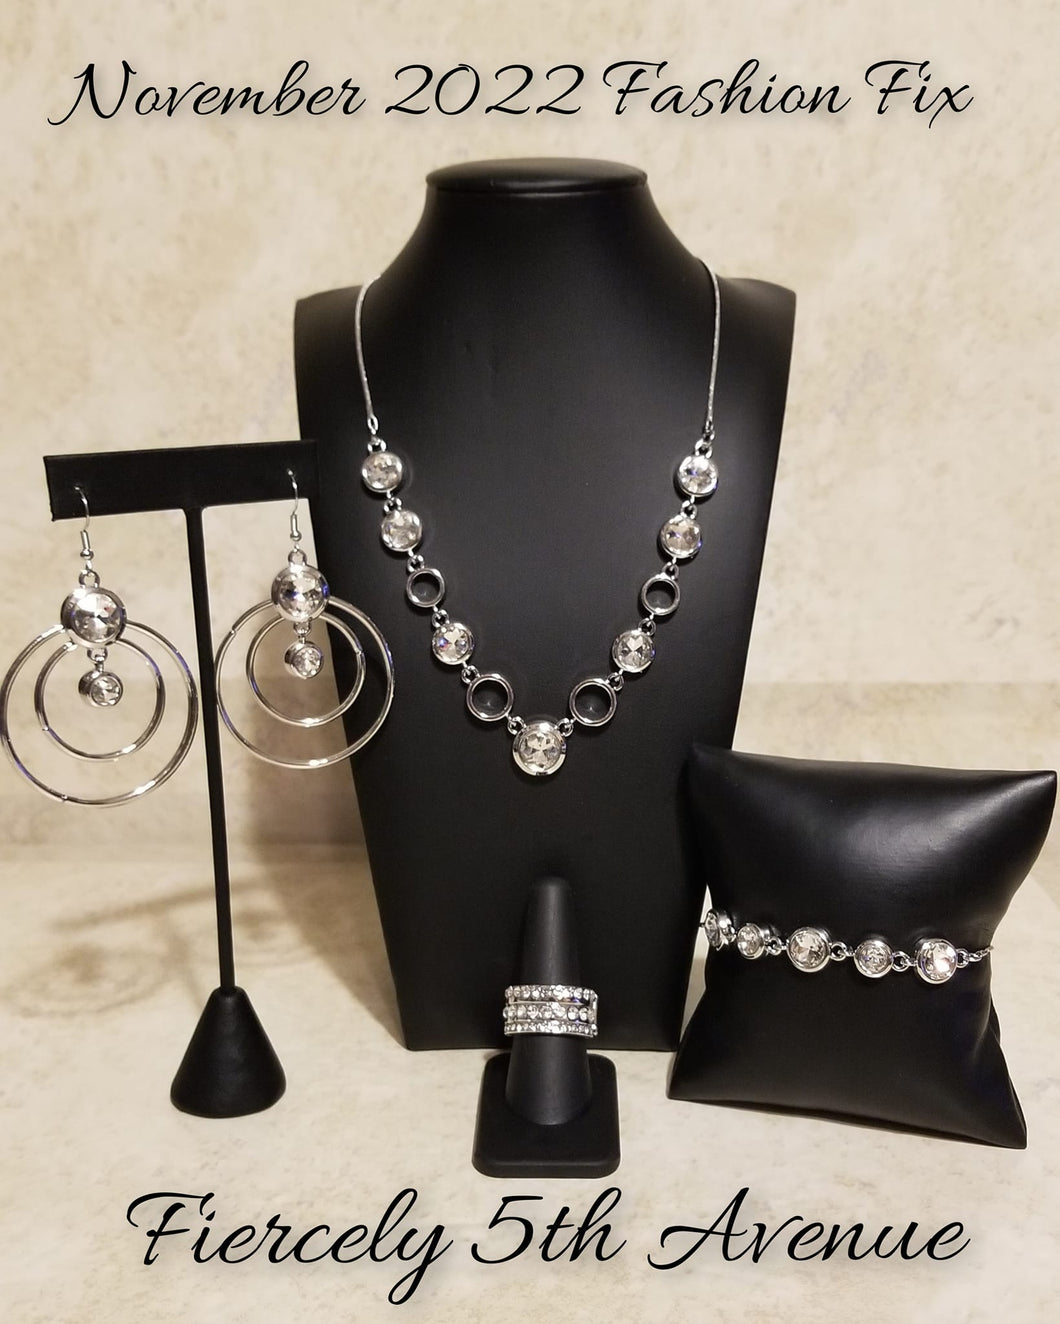 Fiercely 5th Avenue Fashion Fix by Paparazzi Accessories (November 